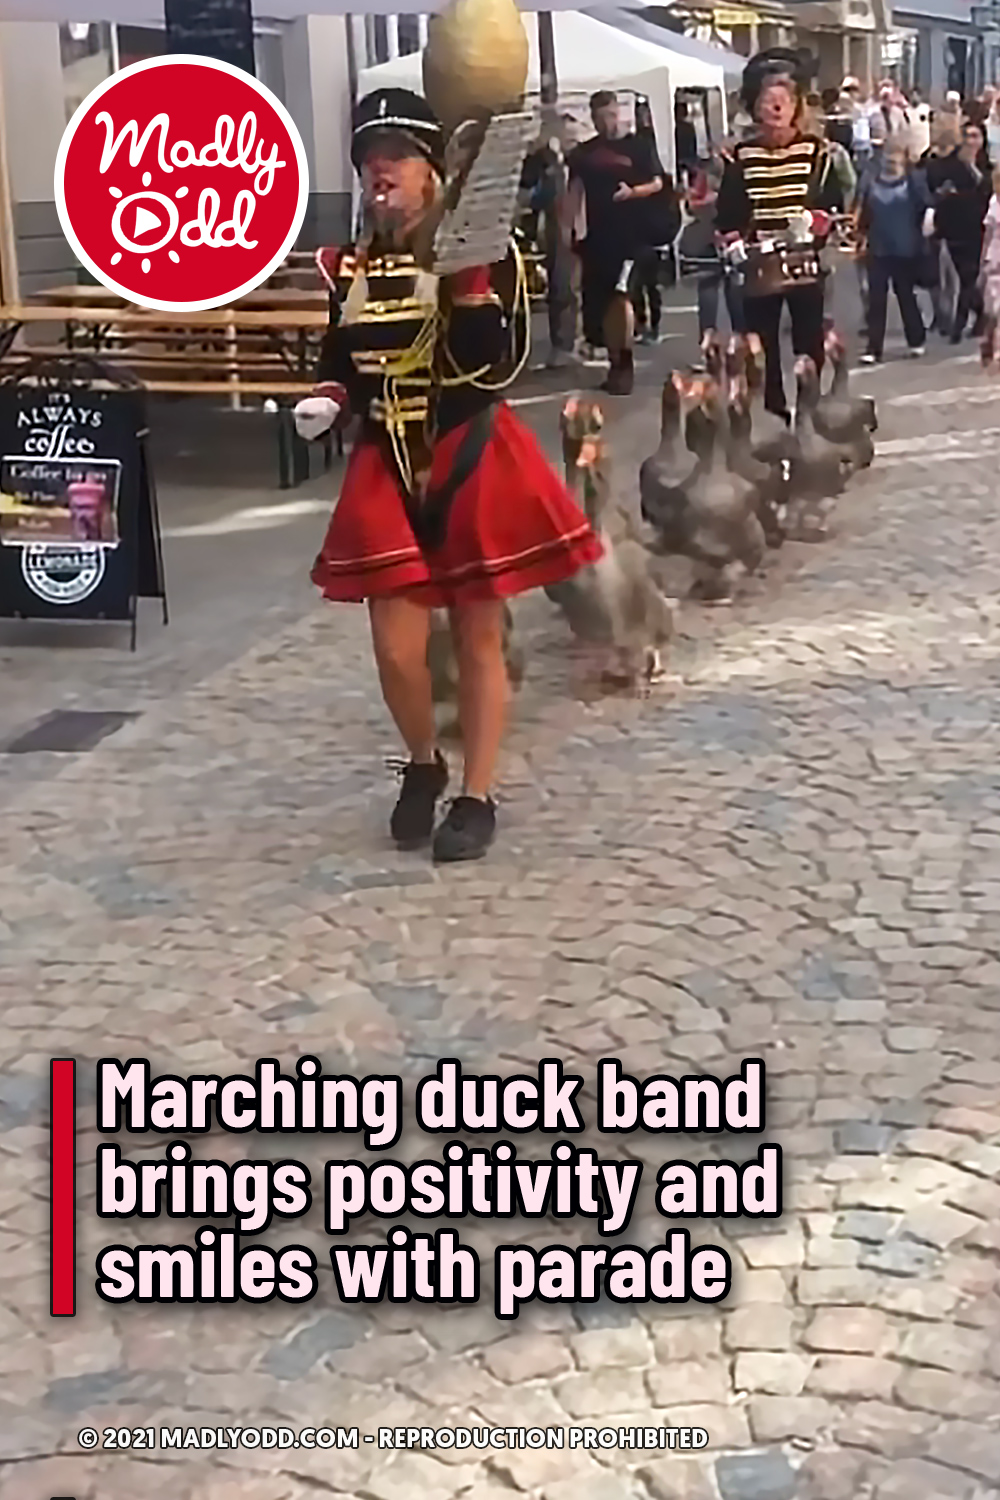 Marching geese band brings positivity and smiles with parade